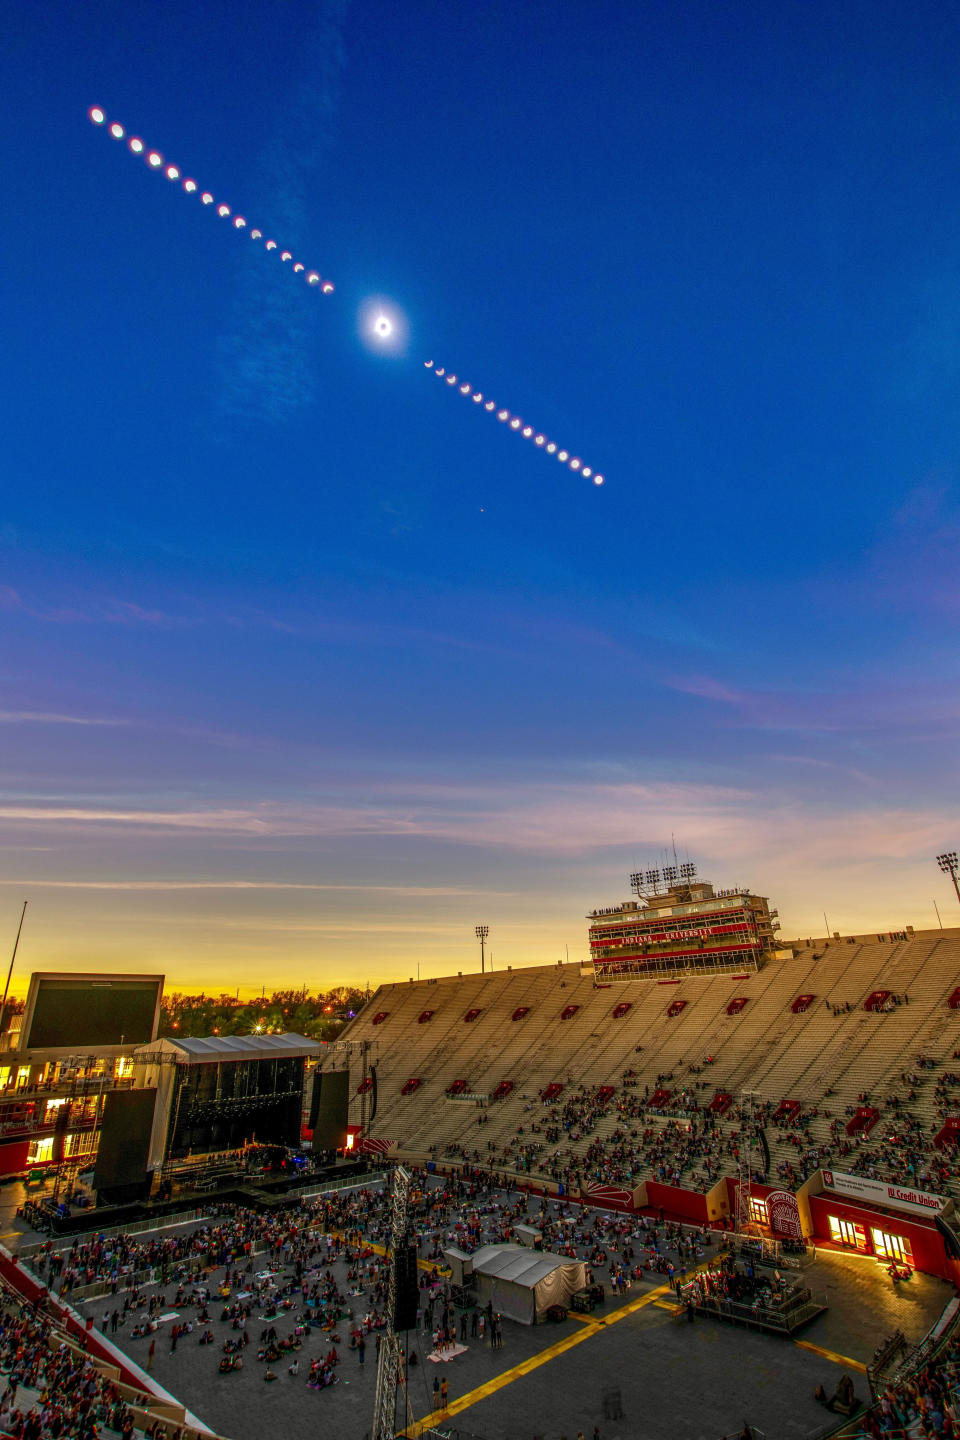 A time-lapse composite image of an eclipse shows the progress of a solar eclipse, framed at center in a darkening sky above a sparsely attended football stadium at Indiana University.